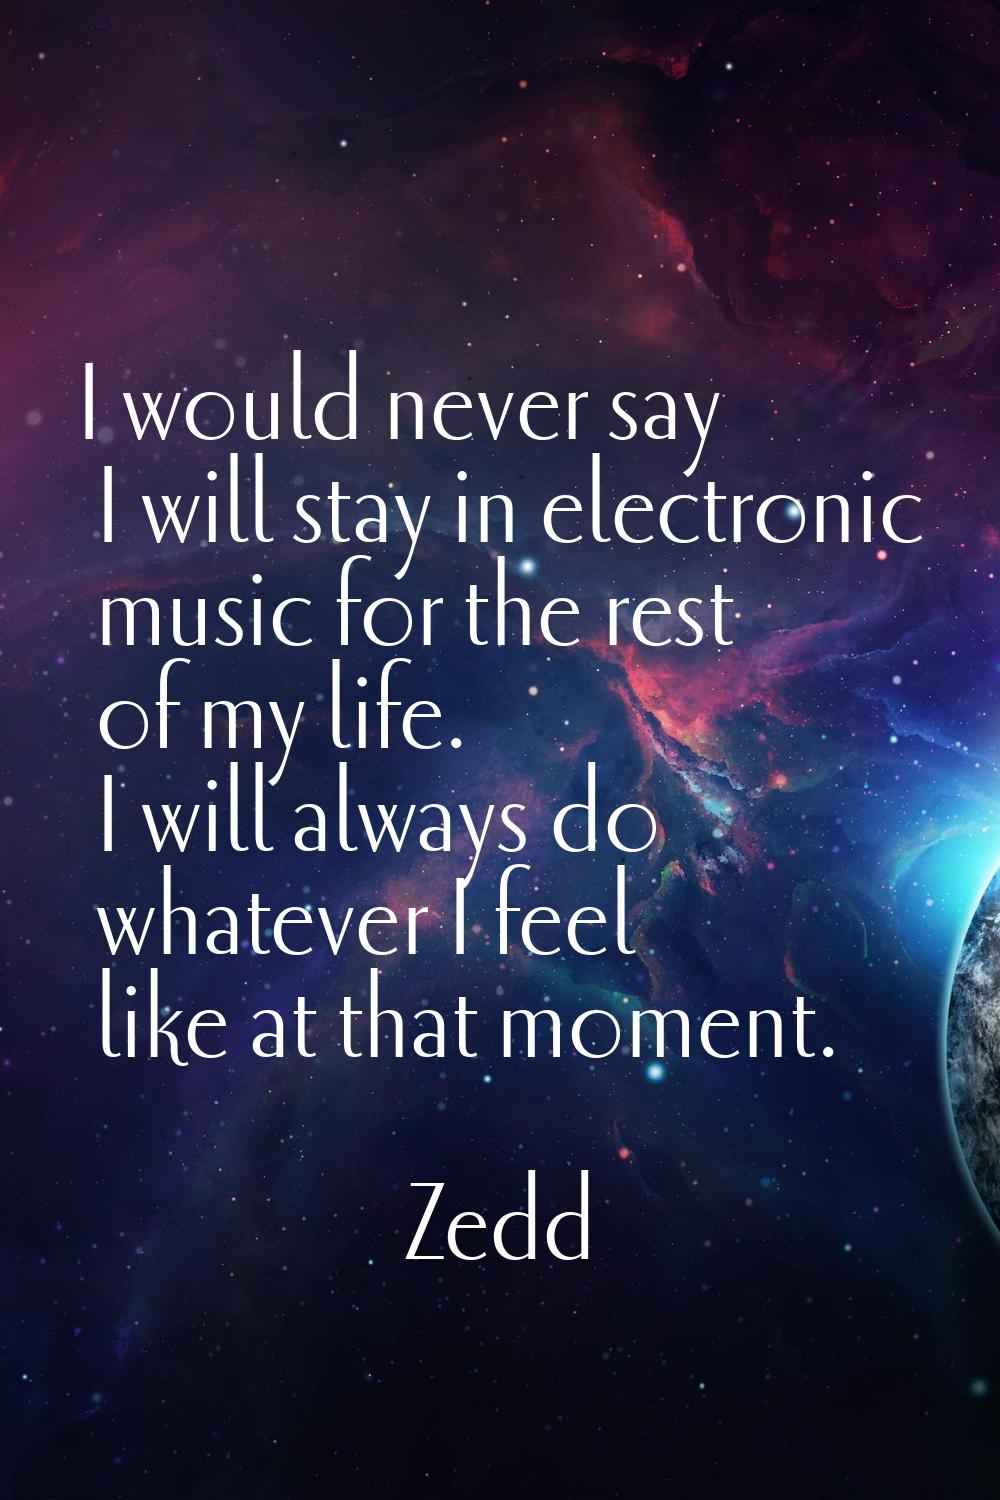 I would never say I will stay in electronic music for the rest of my life. I will always do whateve